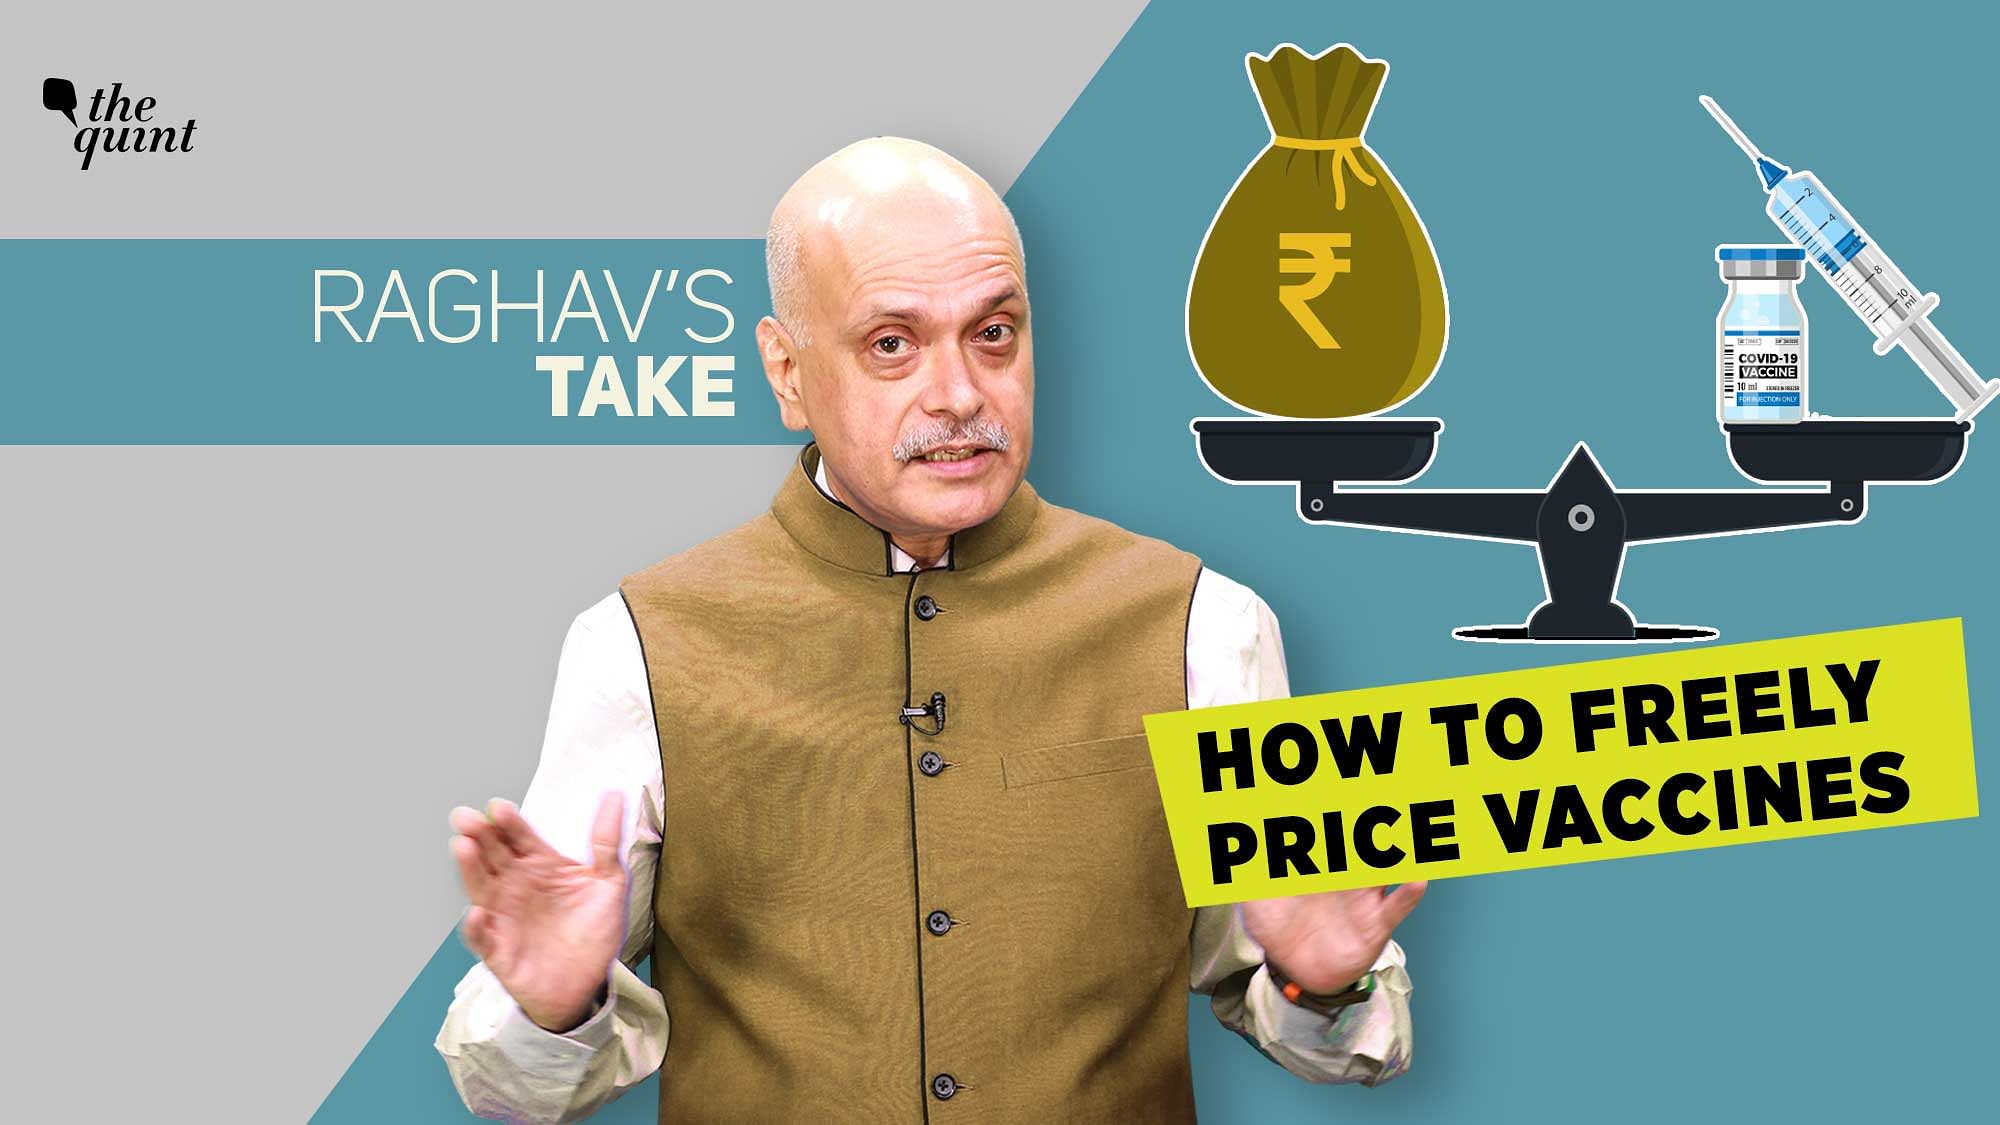 Image of The Quint’s Co-Founder &amp; Editor Raghav Bahl used for representational purposes.&nbsp;